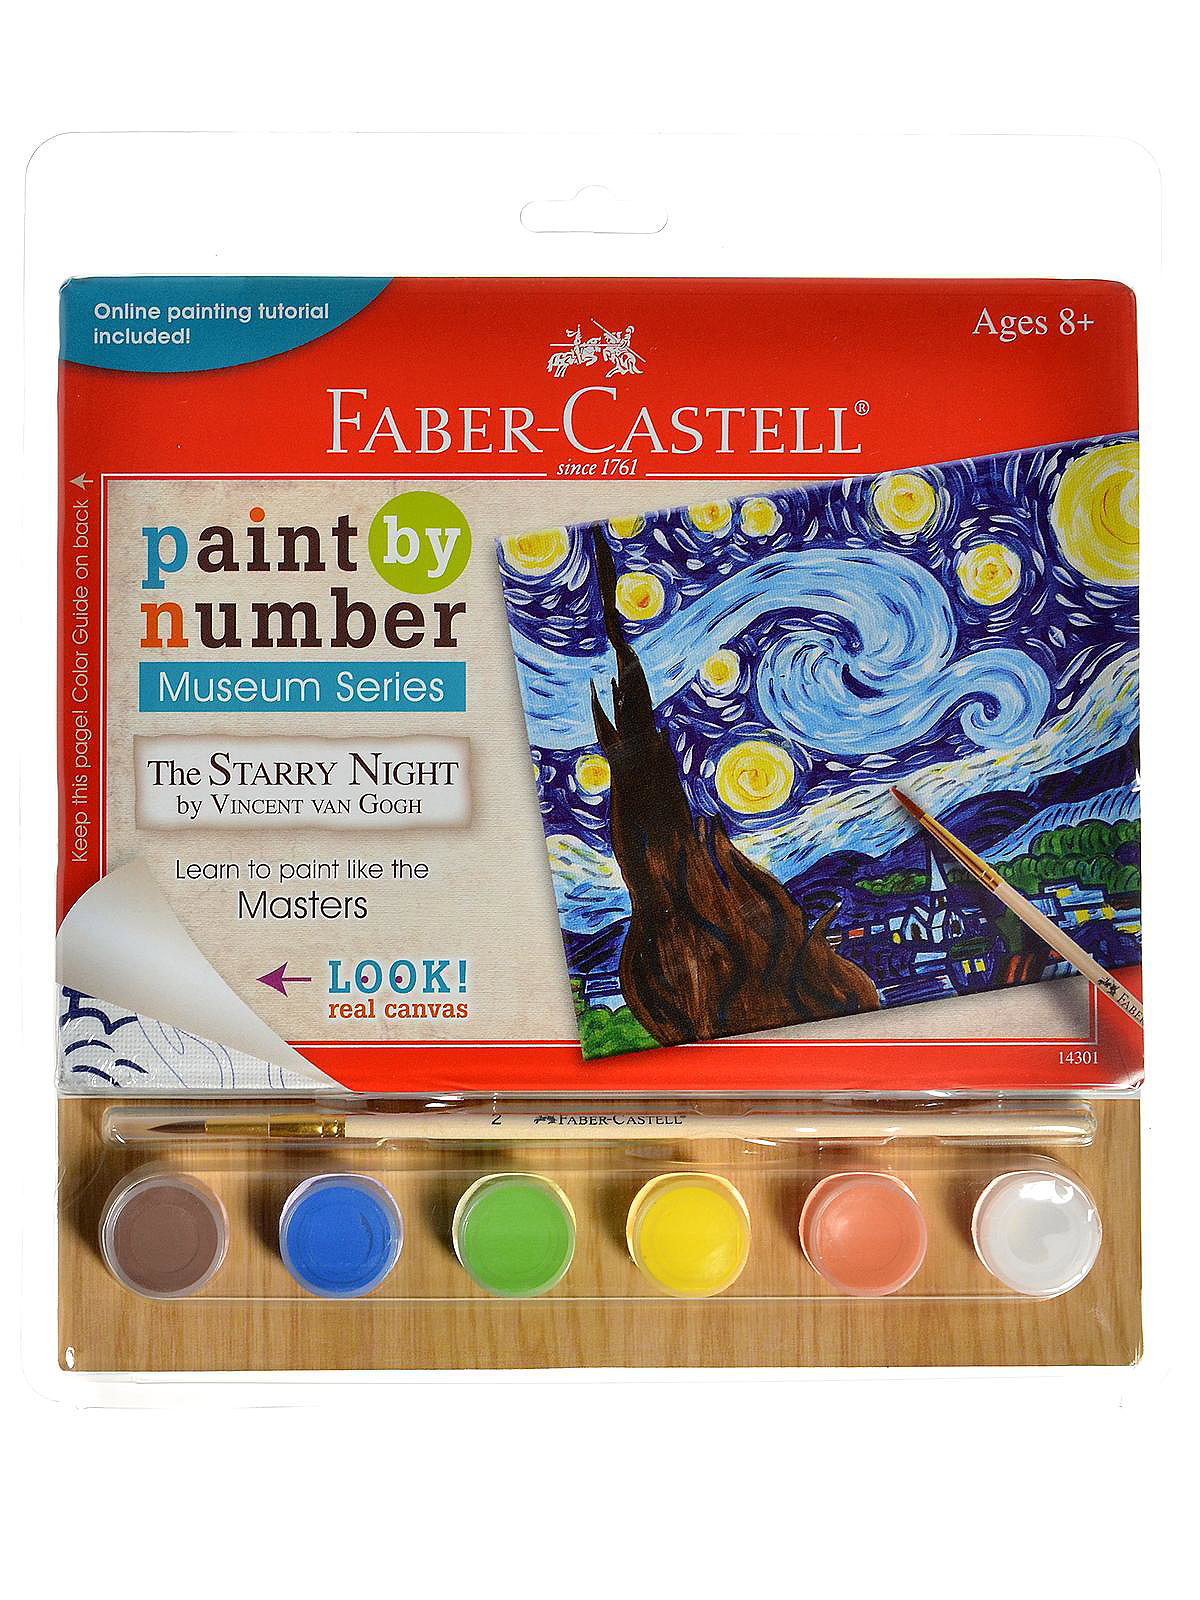 Paint by Number Museum Series – Water Lilies - #14350 – Faber